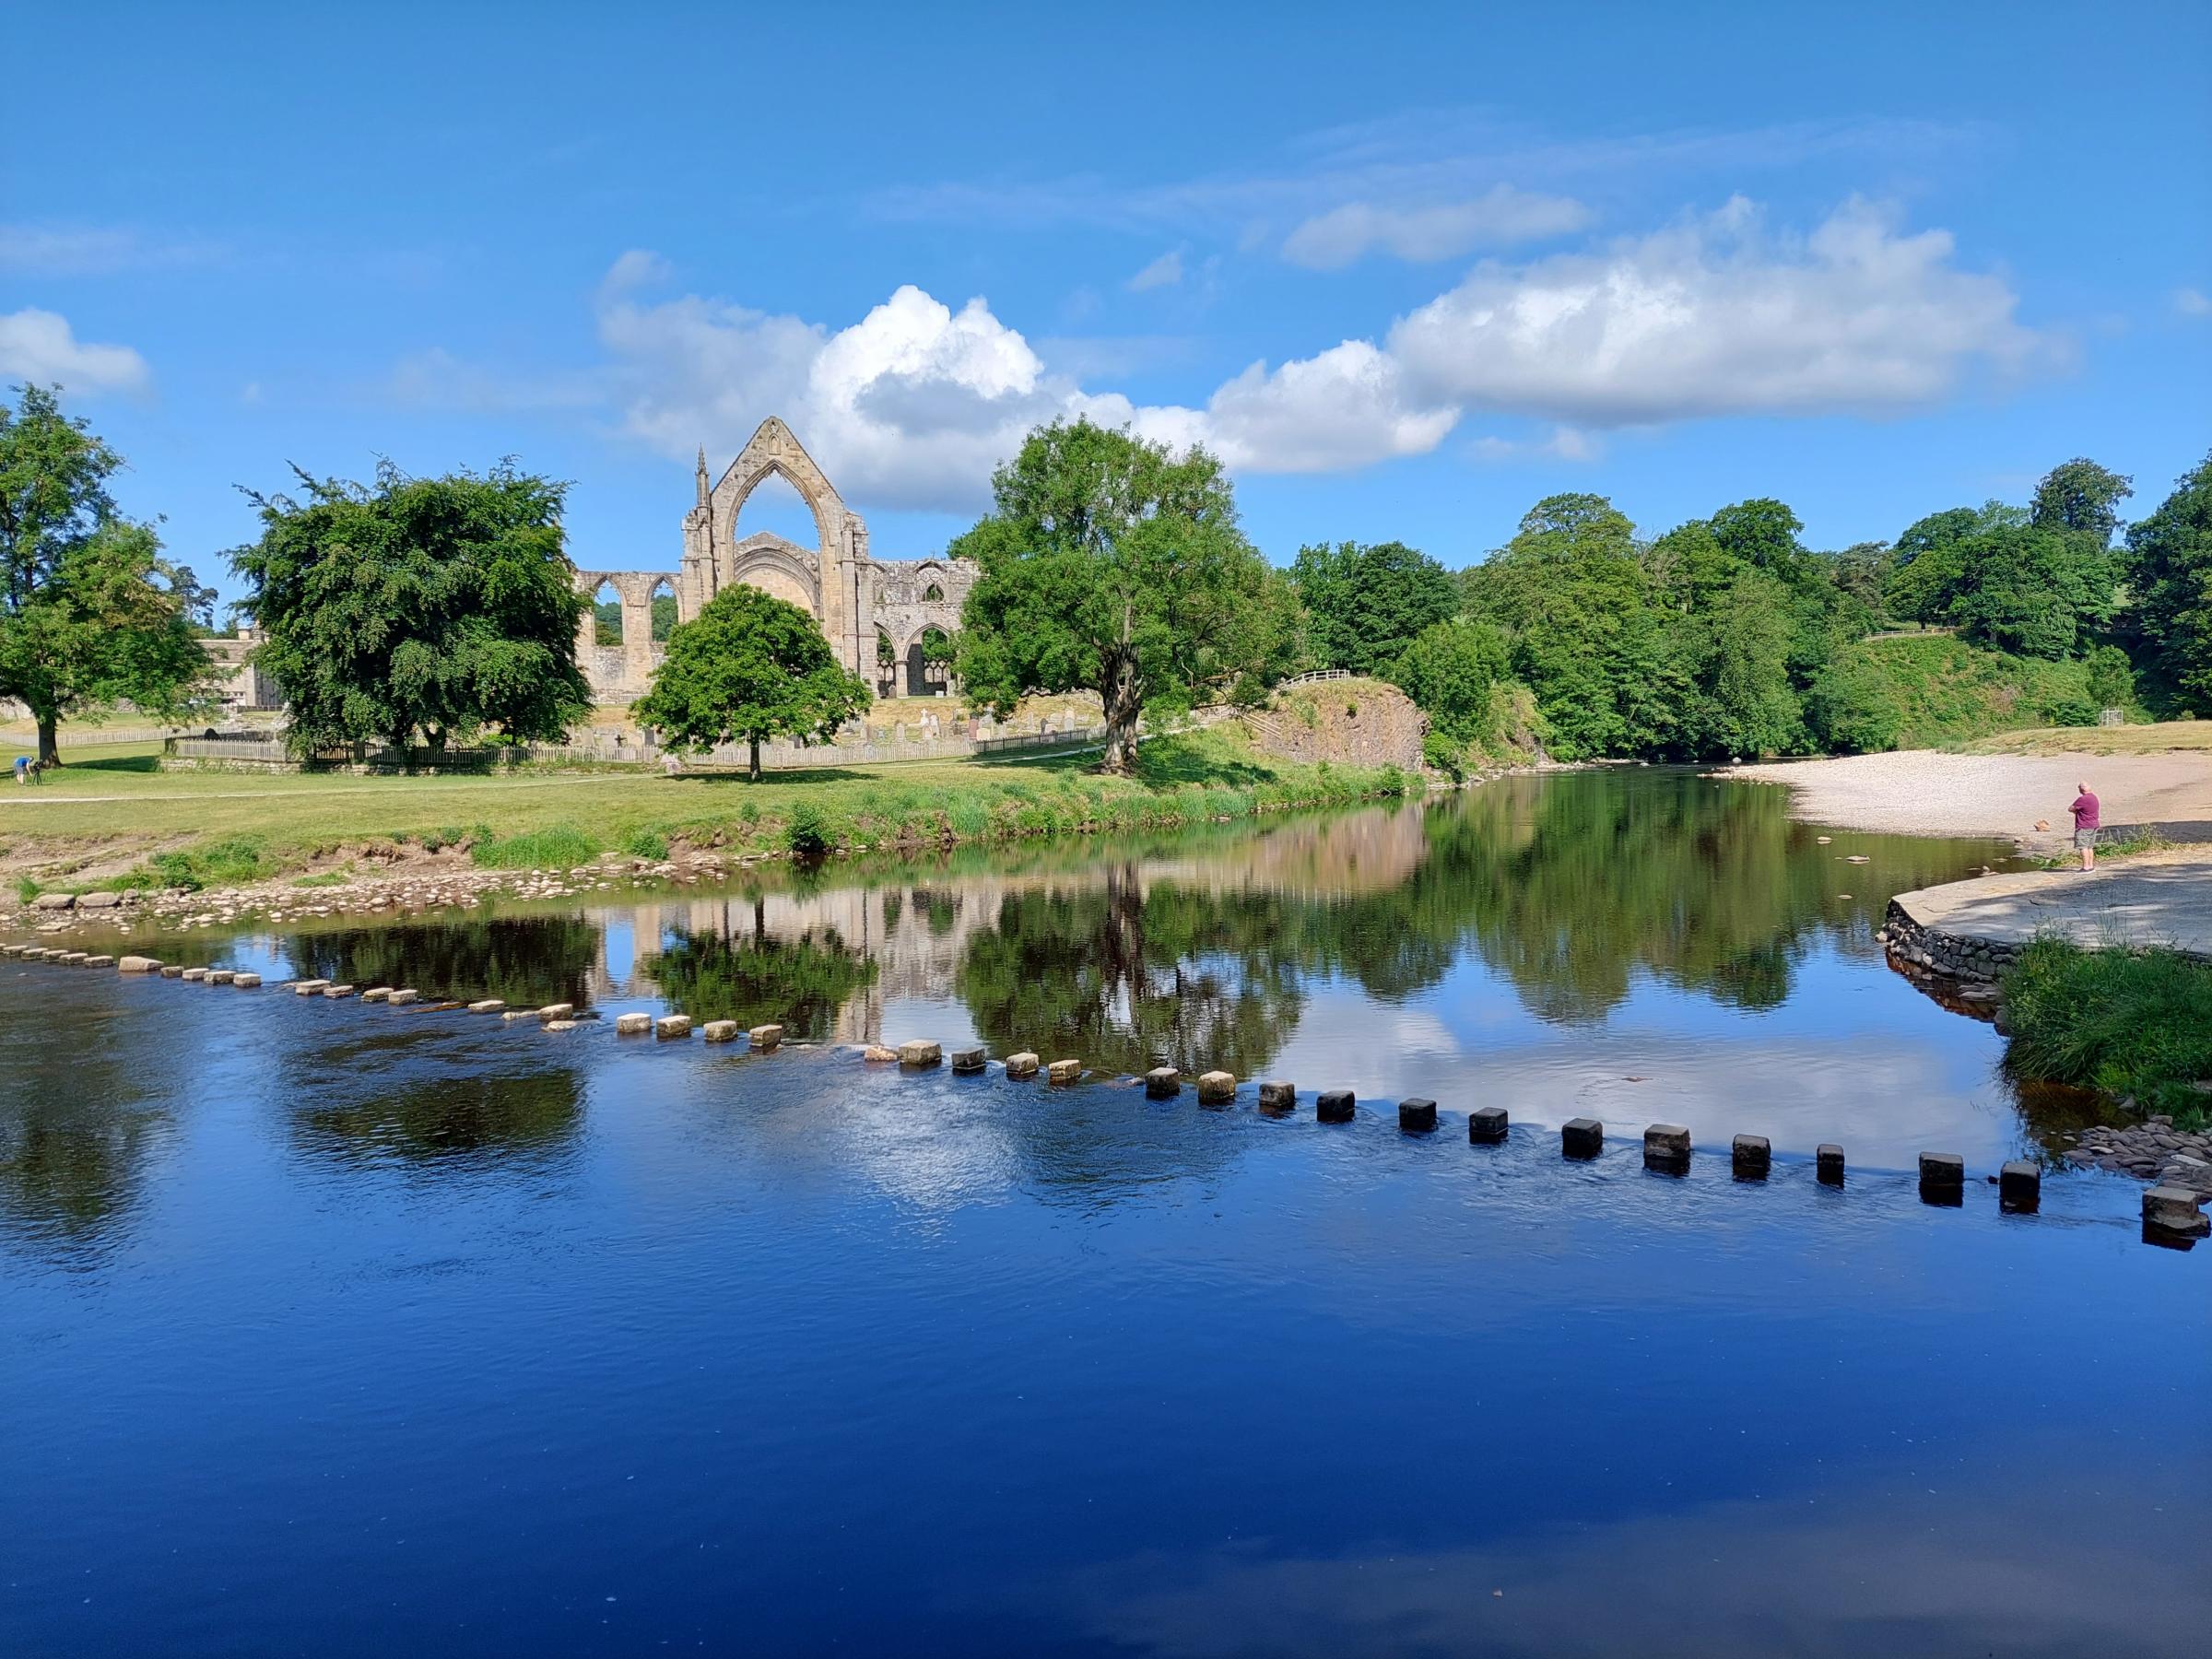 the stepping stones over the River Wharfe with Bolton Abbey Priory, by Ian Naylor 